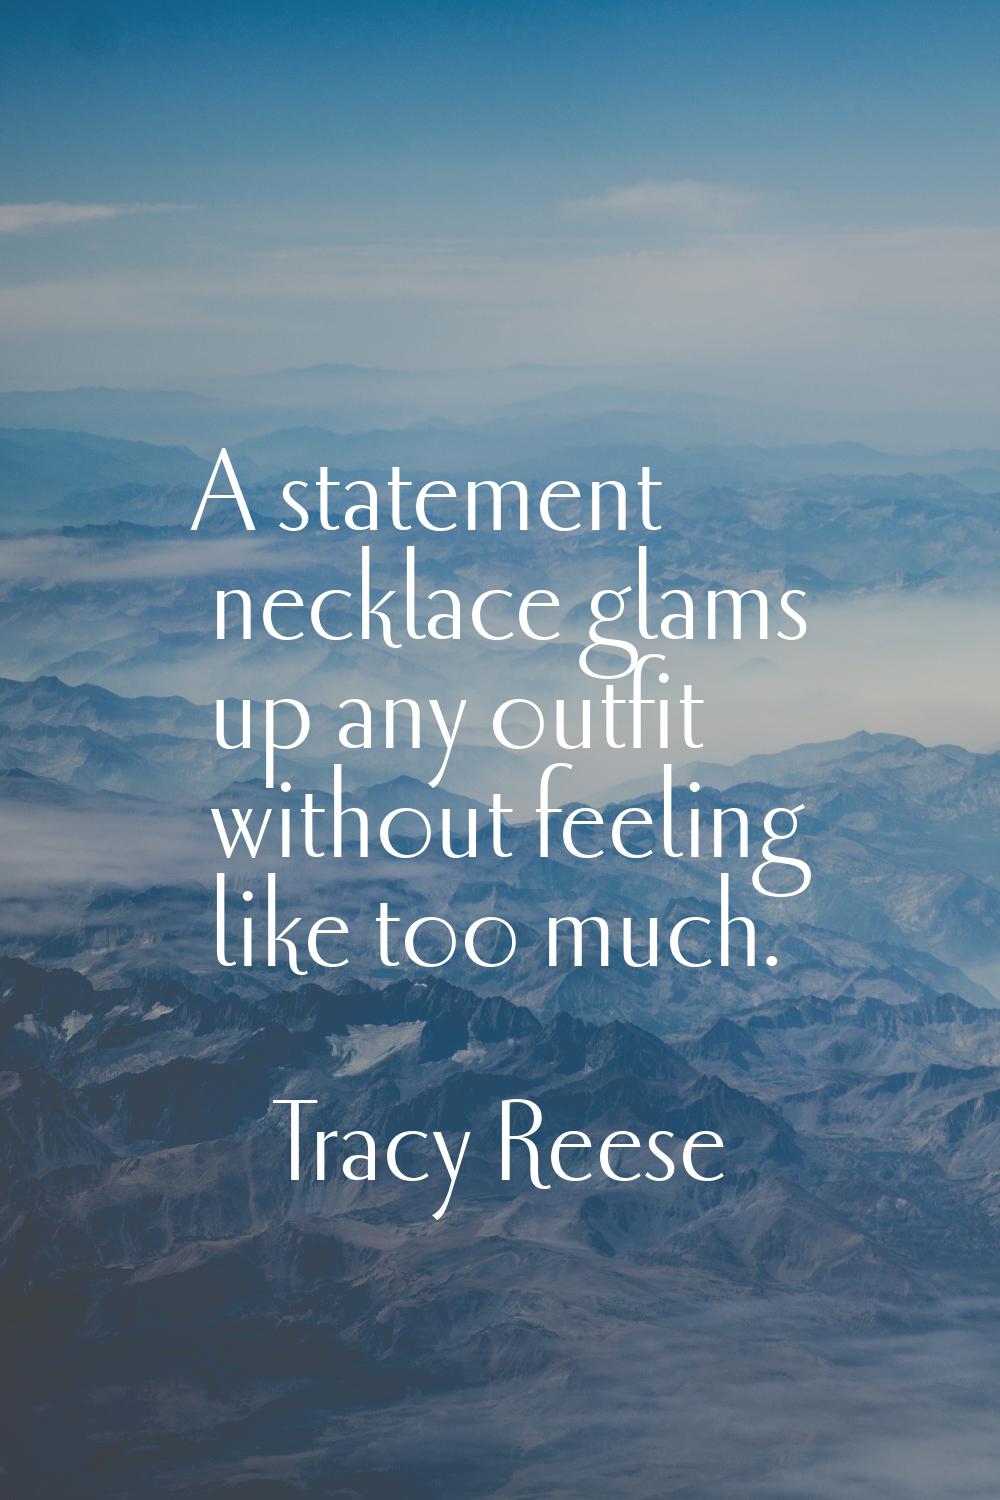 A statement necklace glams up any outfit without feeling like too much.